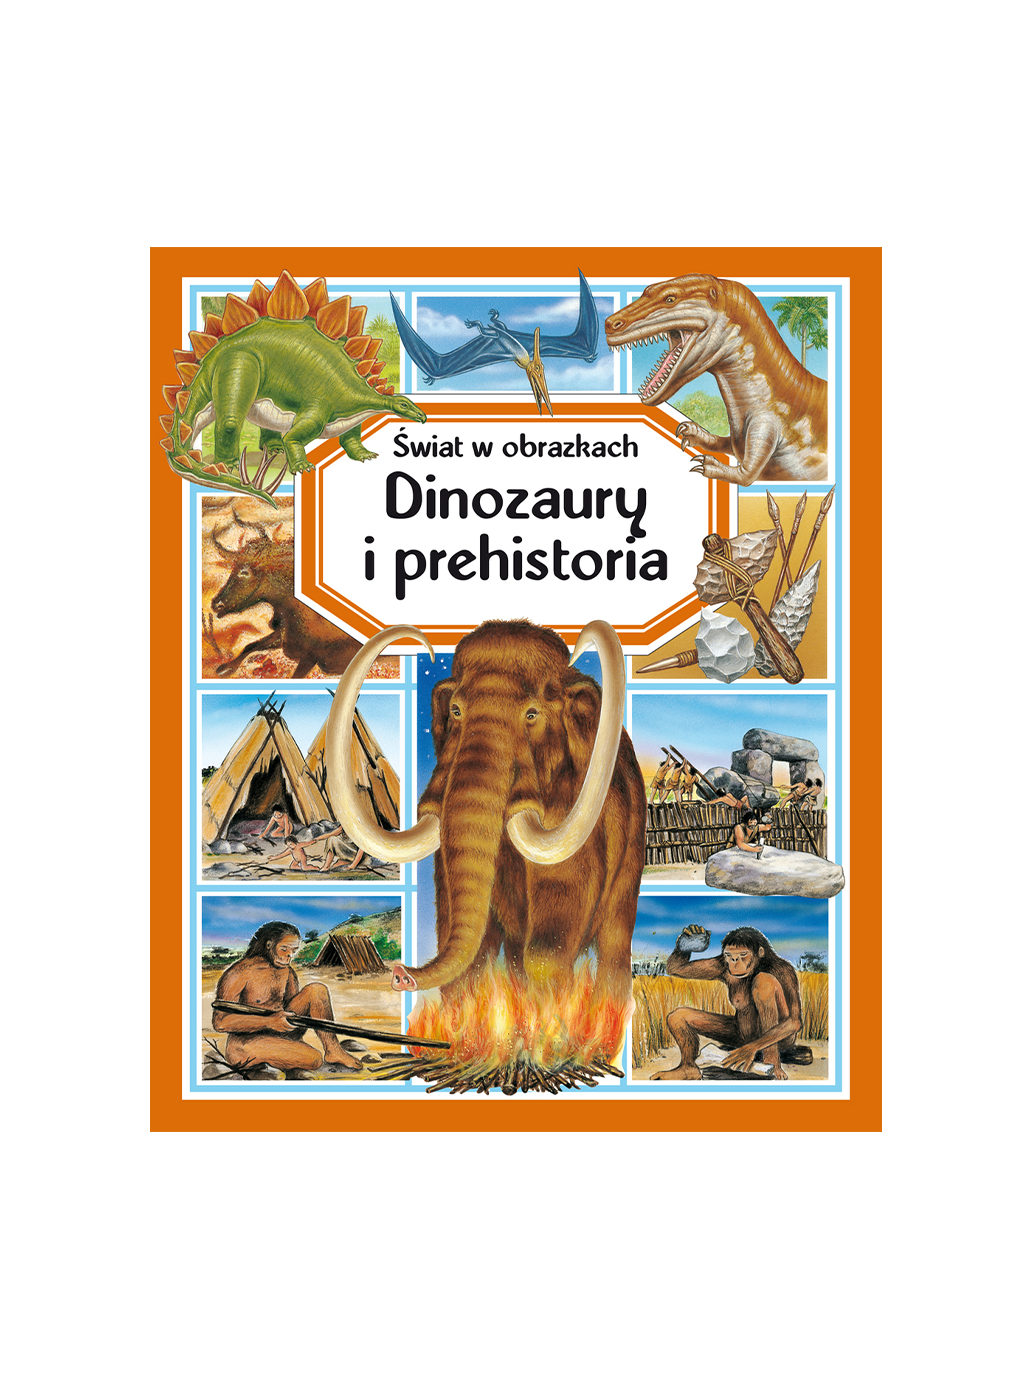 The world in pictures. Dinosaurs and prehistory